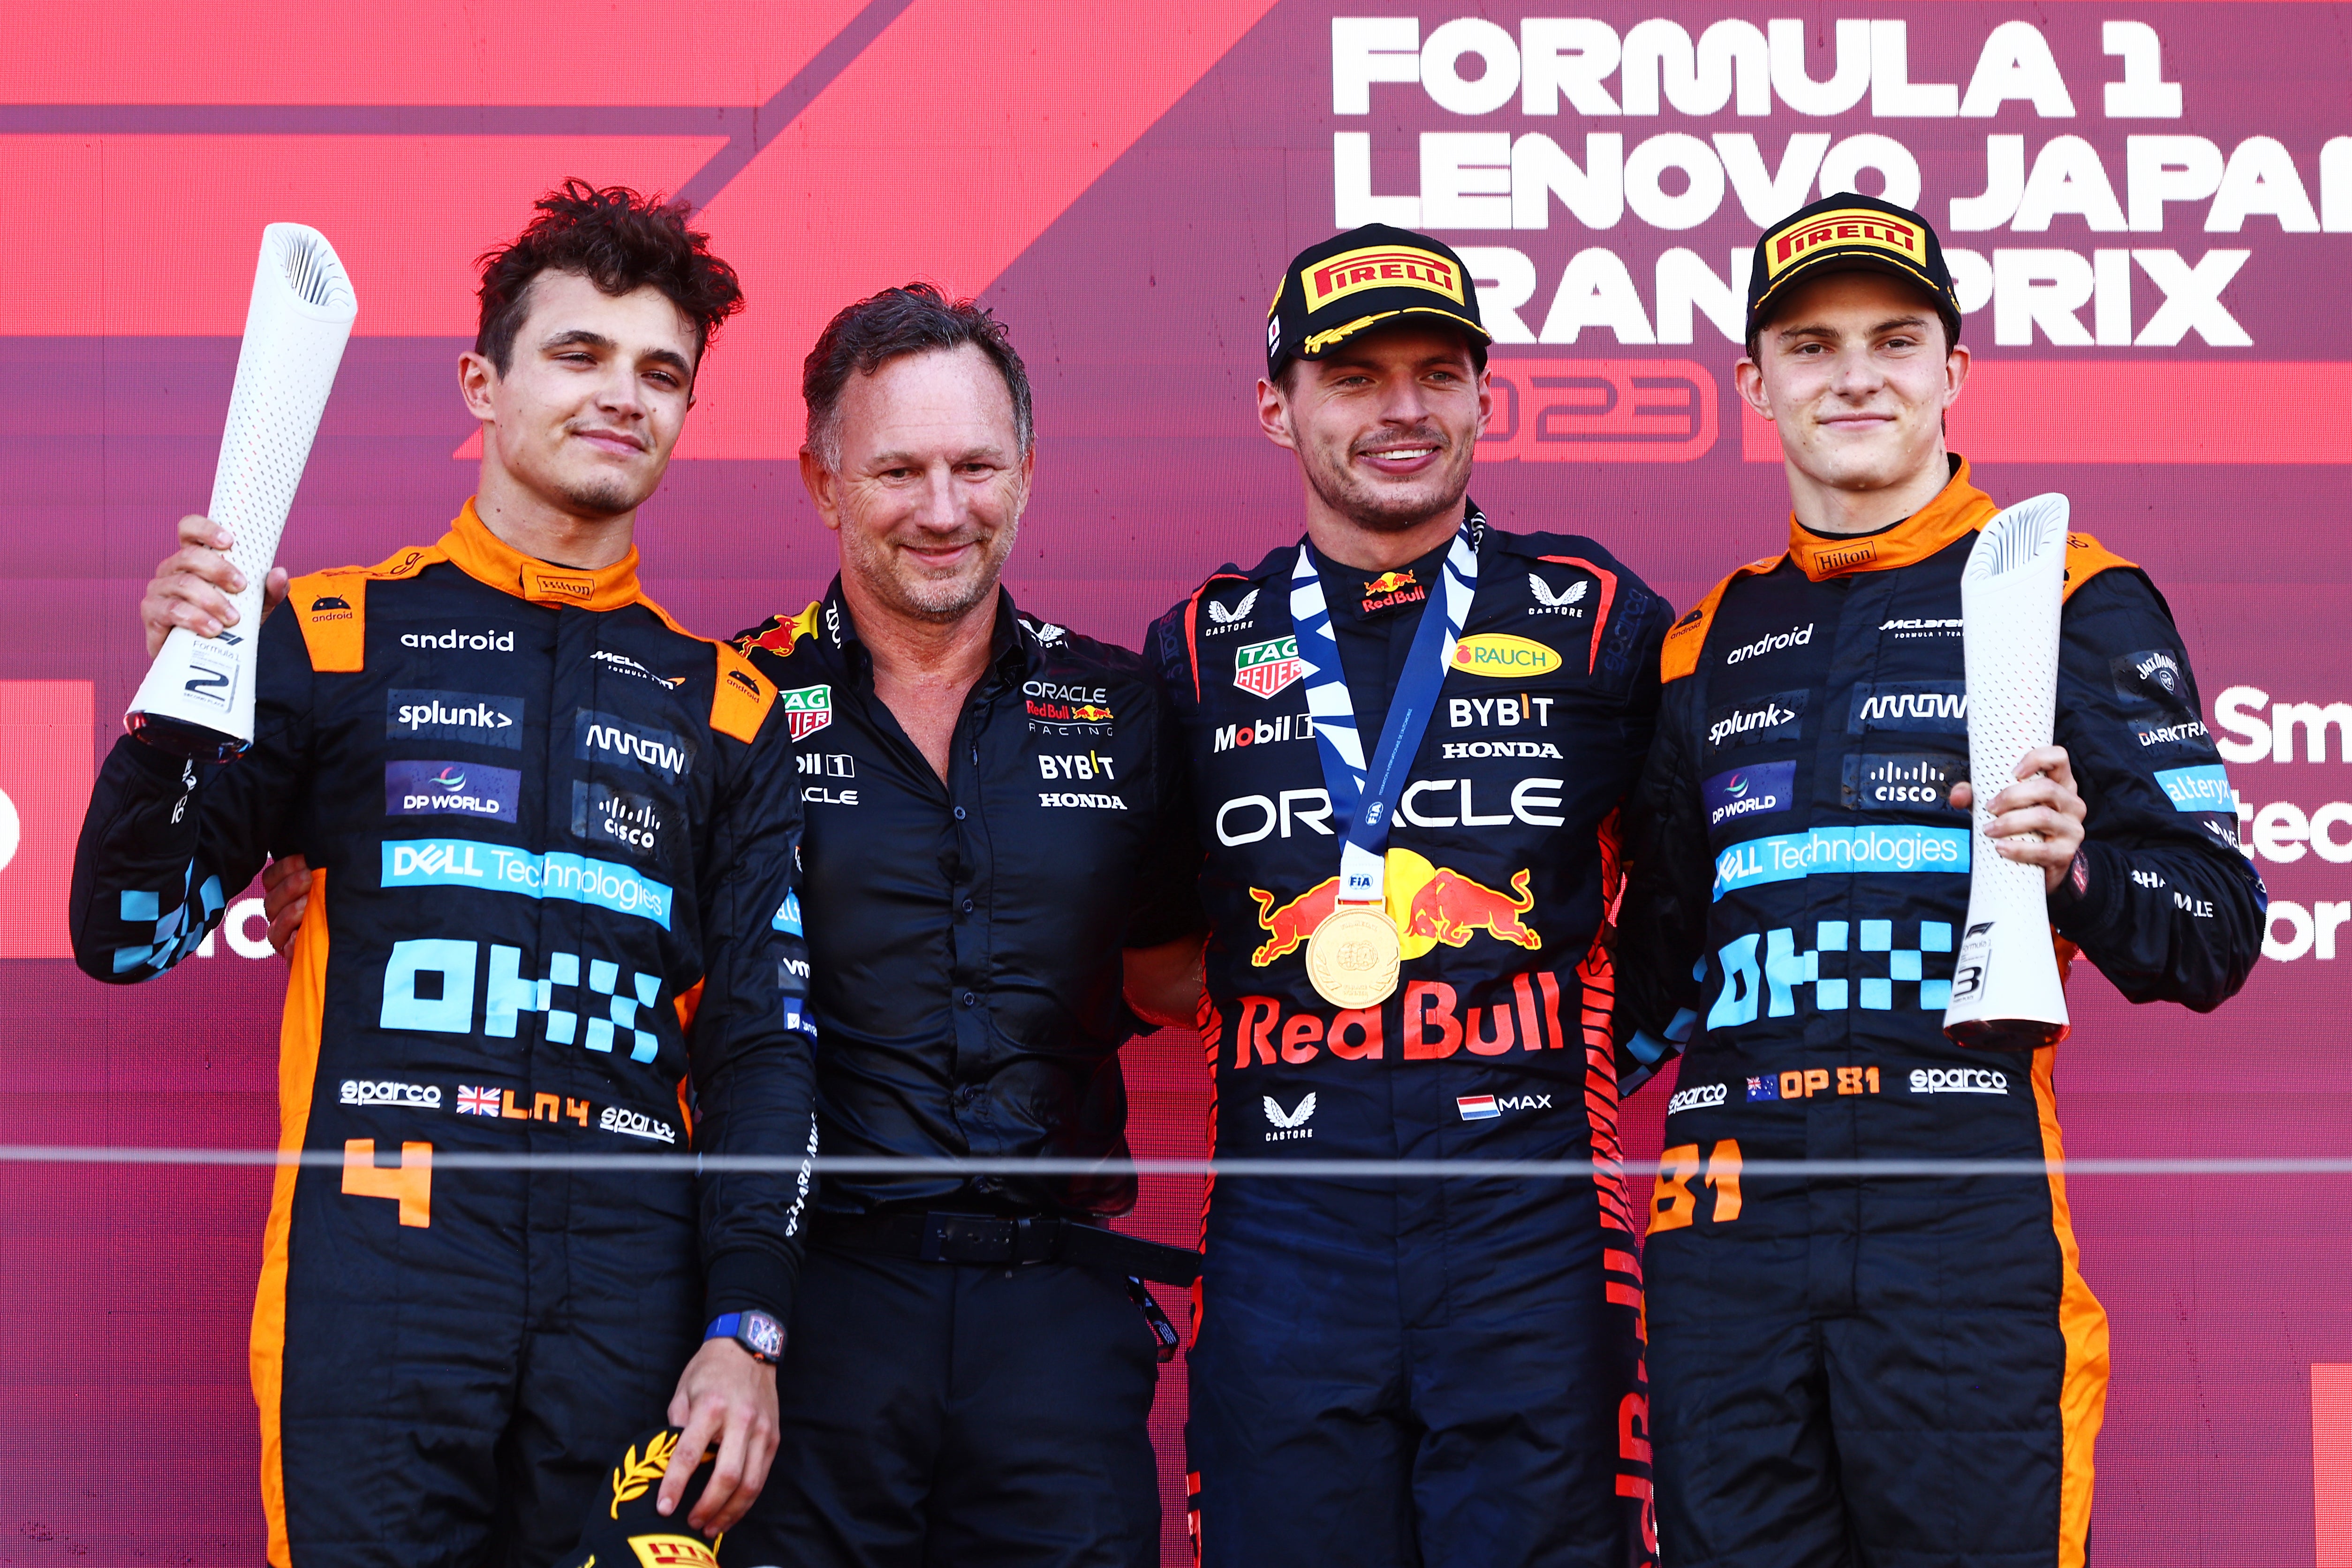 Red Bull secured the constructors’ crown while Oscar Piastri claimed his first podium in F1